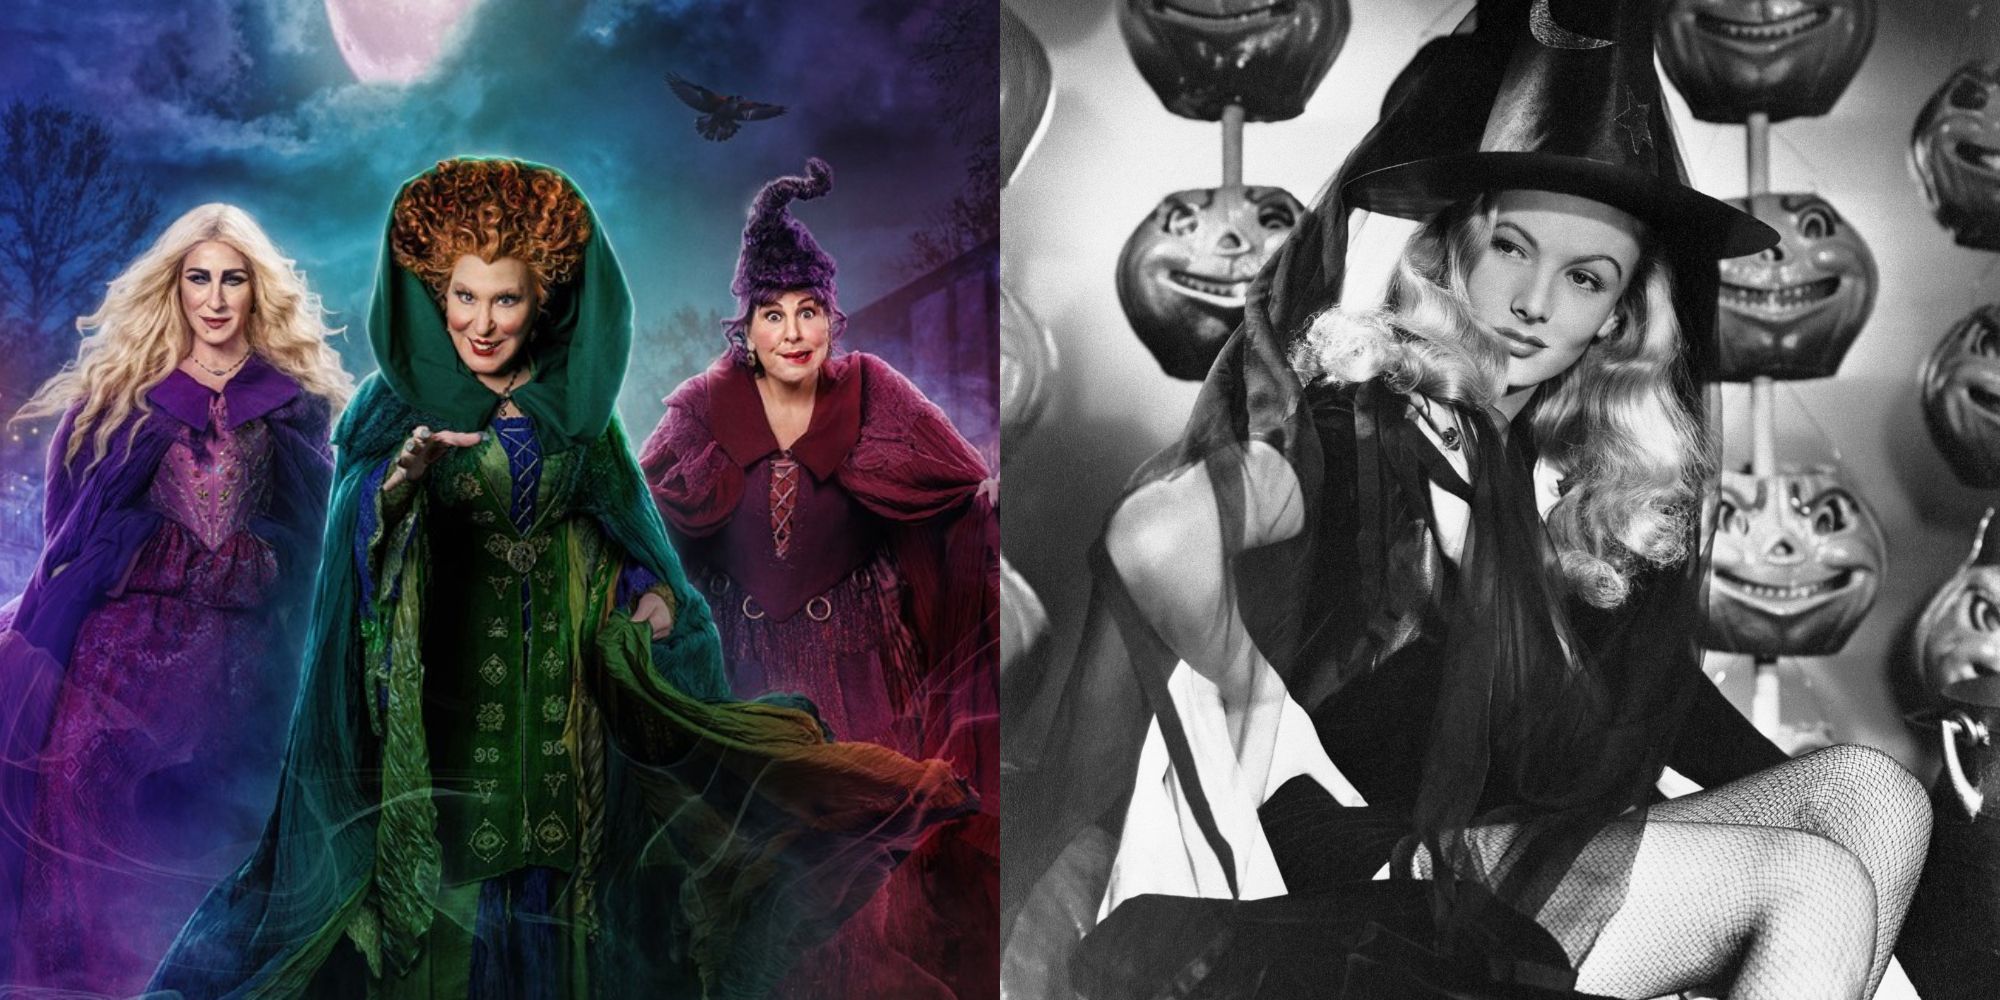 Split image showing the Sanderson sisters in Hocus Pocus 2 and Jennifer in I Married A Witch